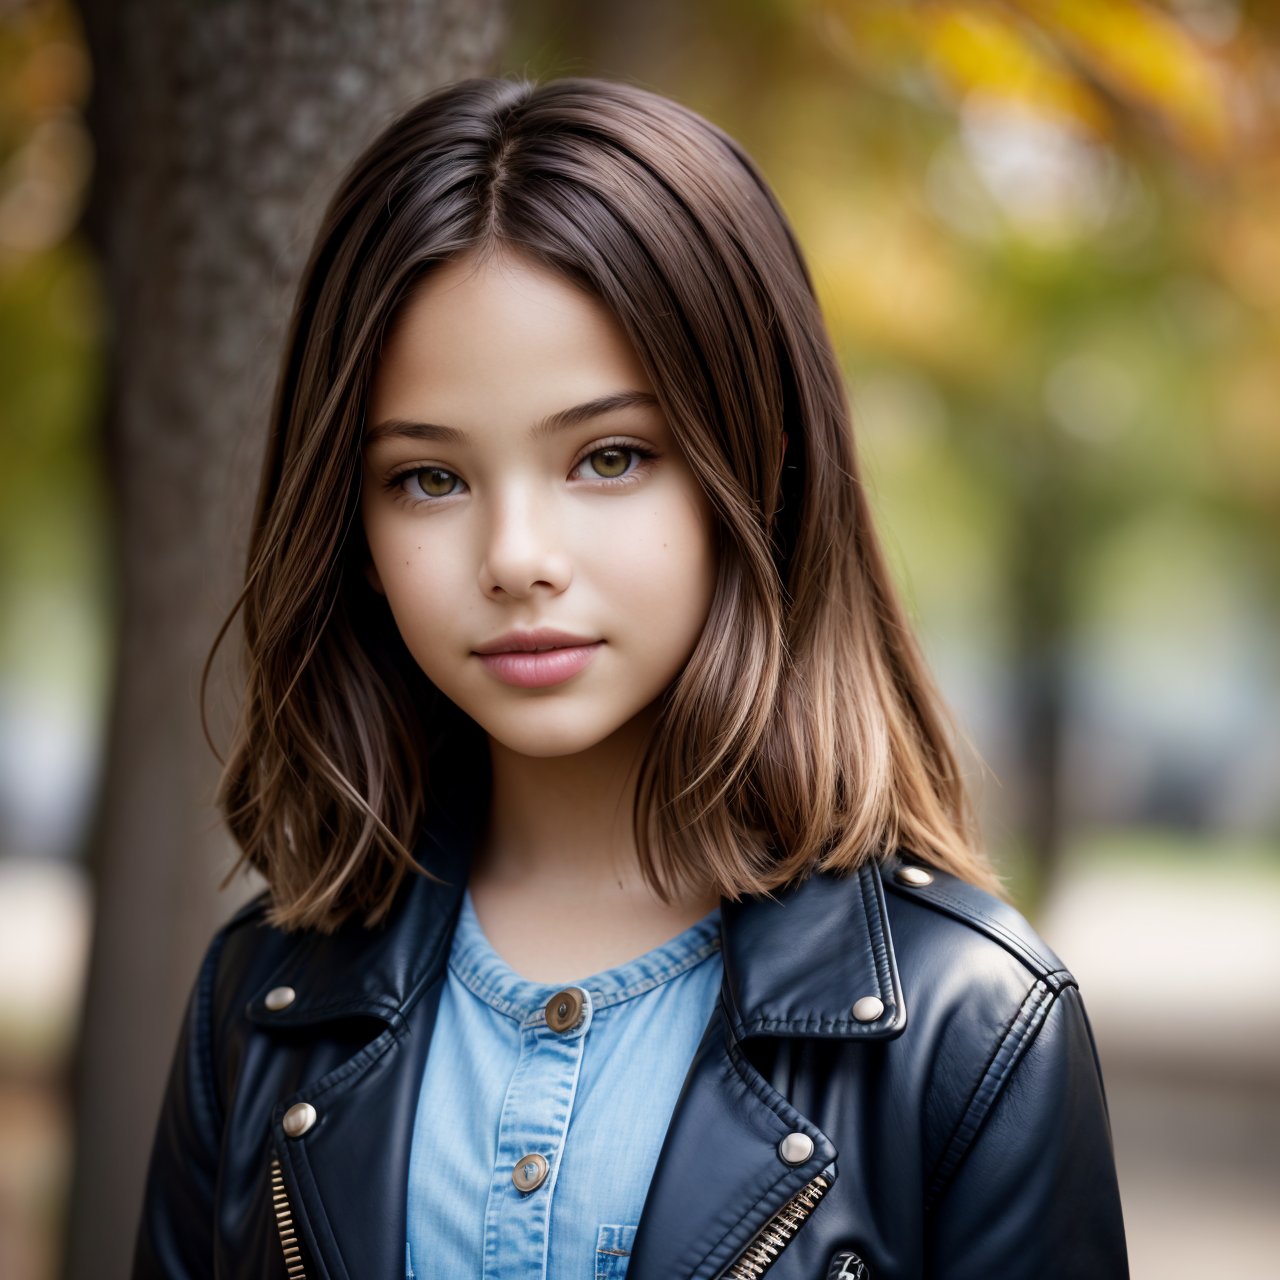 (masterpiece:1.3), wallpaper, looking at viewer, full body portrait of calm (AIDA_LoRA_LG2014:1.13) <lora:AIDA_LoRA_LG2014:0.76> as little girl in a leather jacket standing in the park next to the tree, pretty face, naughty, funny, happy, playful, intimate, cinematic, dramatic, hyper realistic, studio photo, studio photo, kkw-ph1, hdr, f1.8 , getty images, (colorful:1.1)